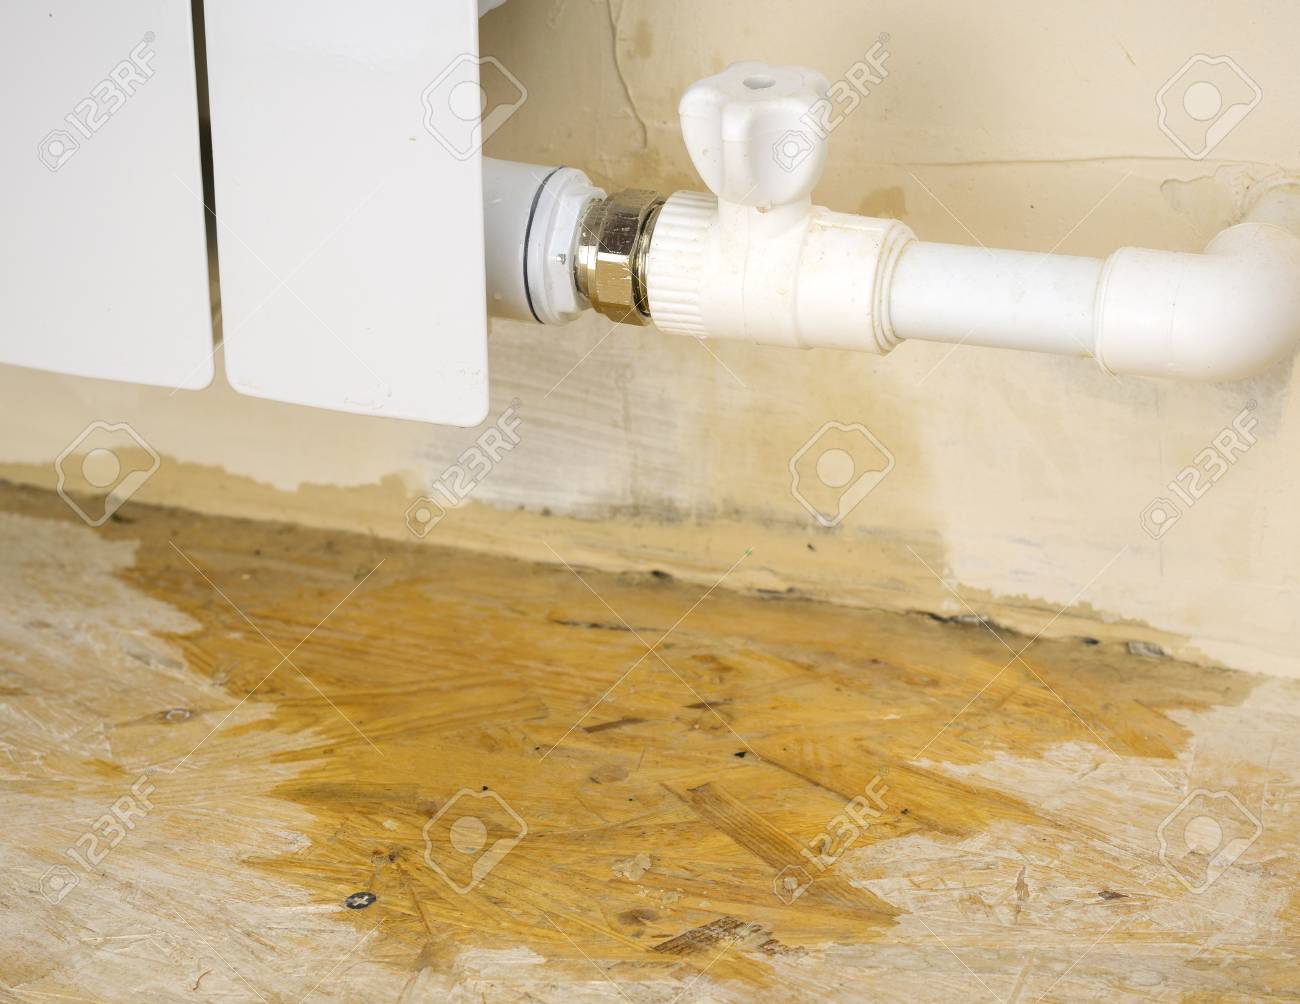 Damage To The Heating System In A Private Home Water Leaks From